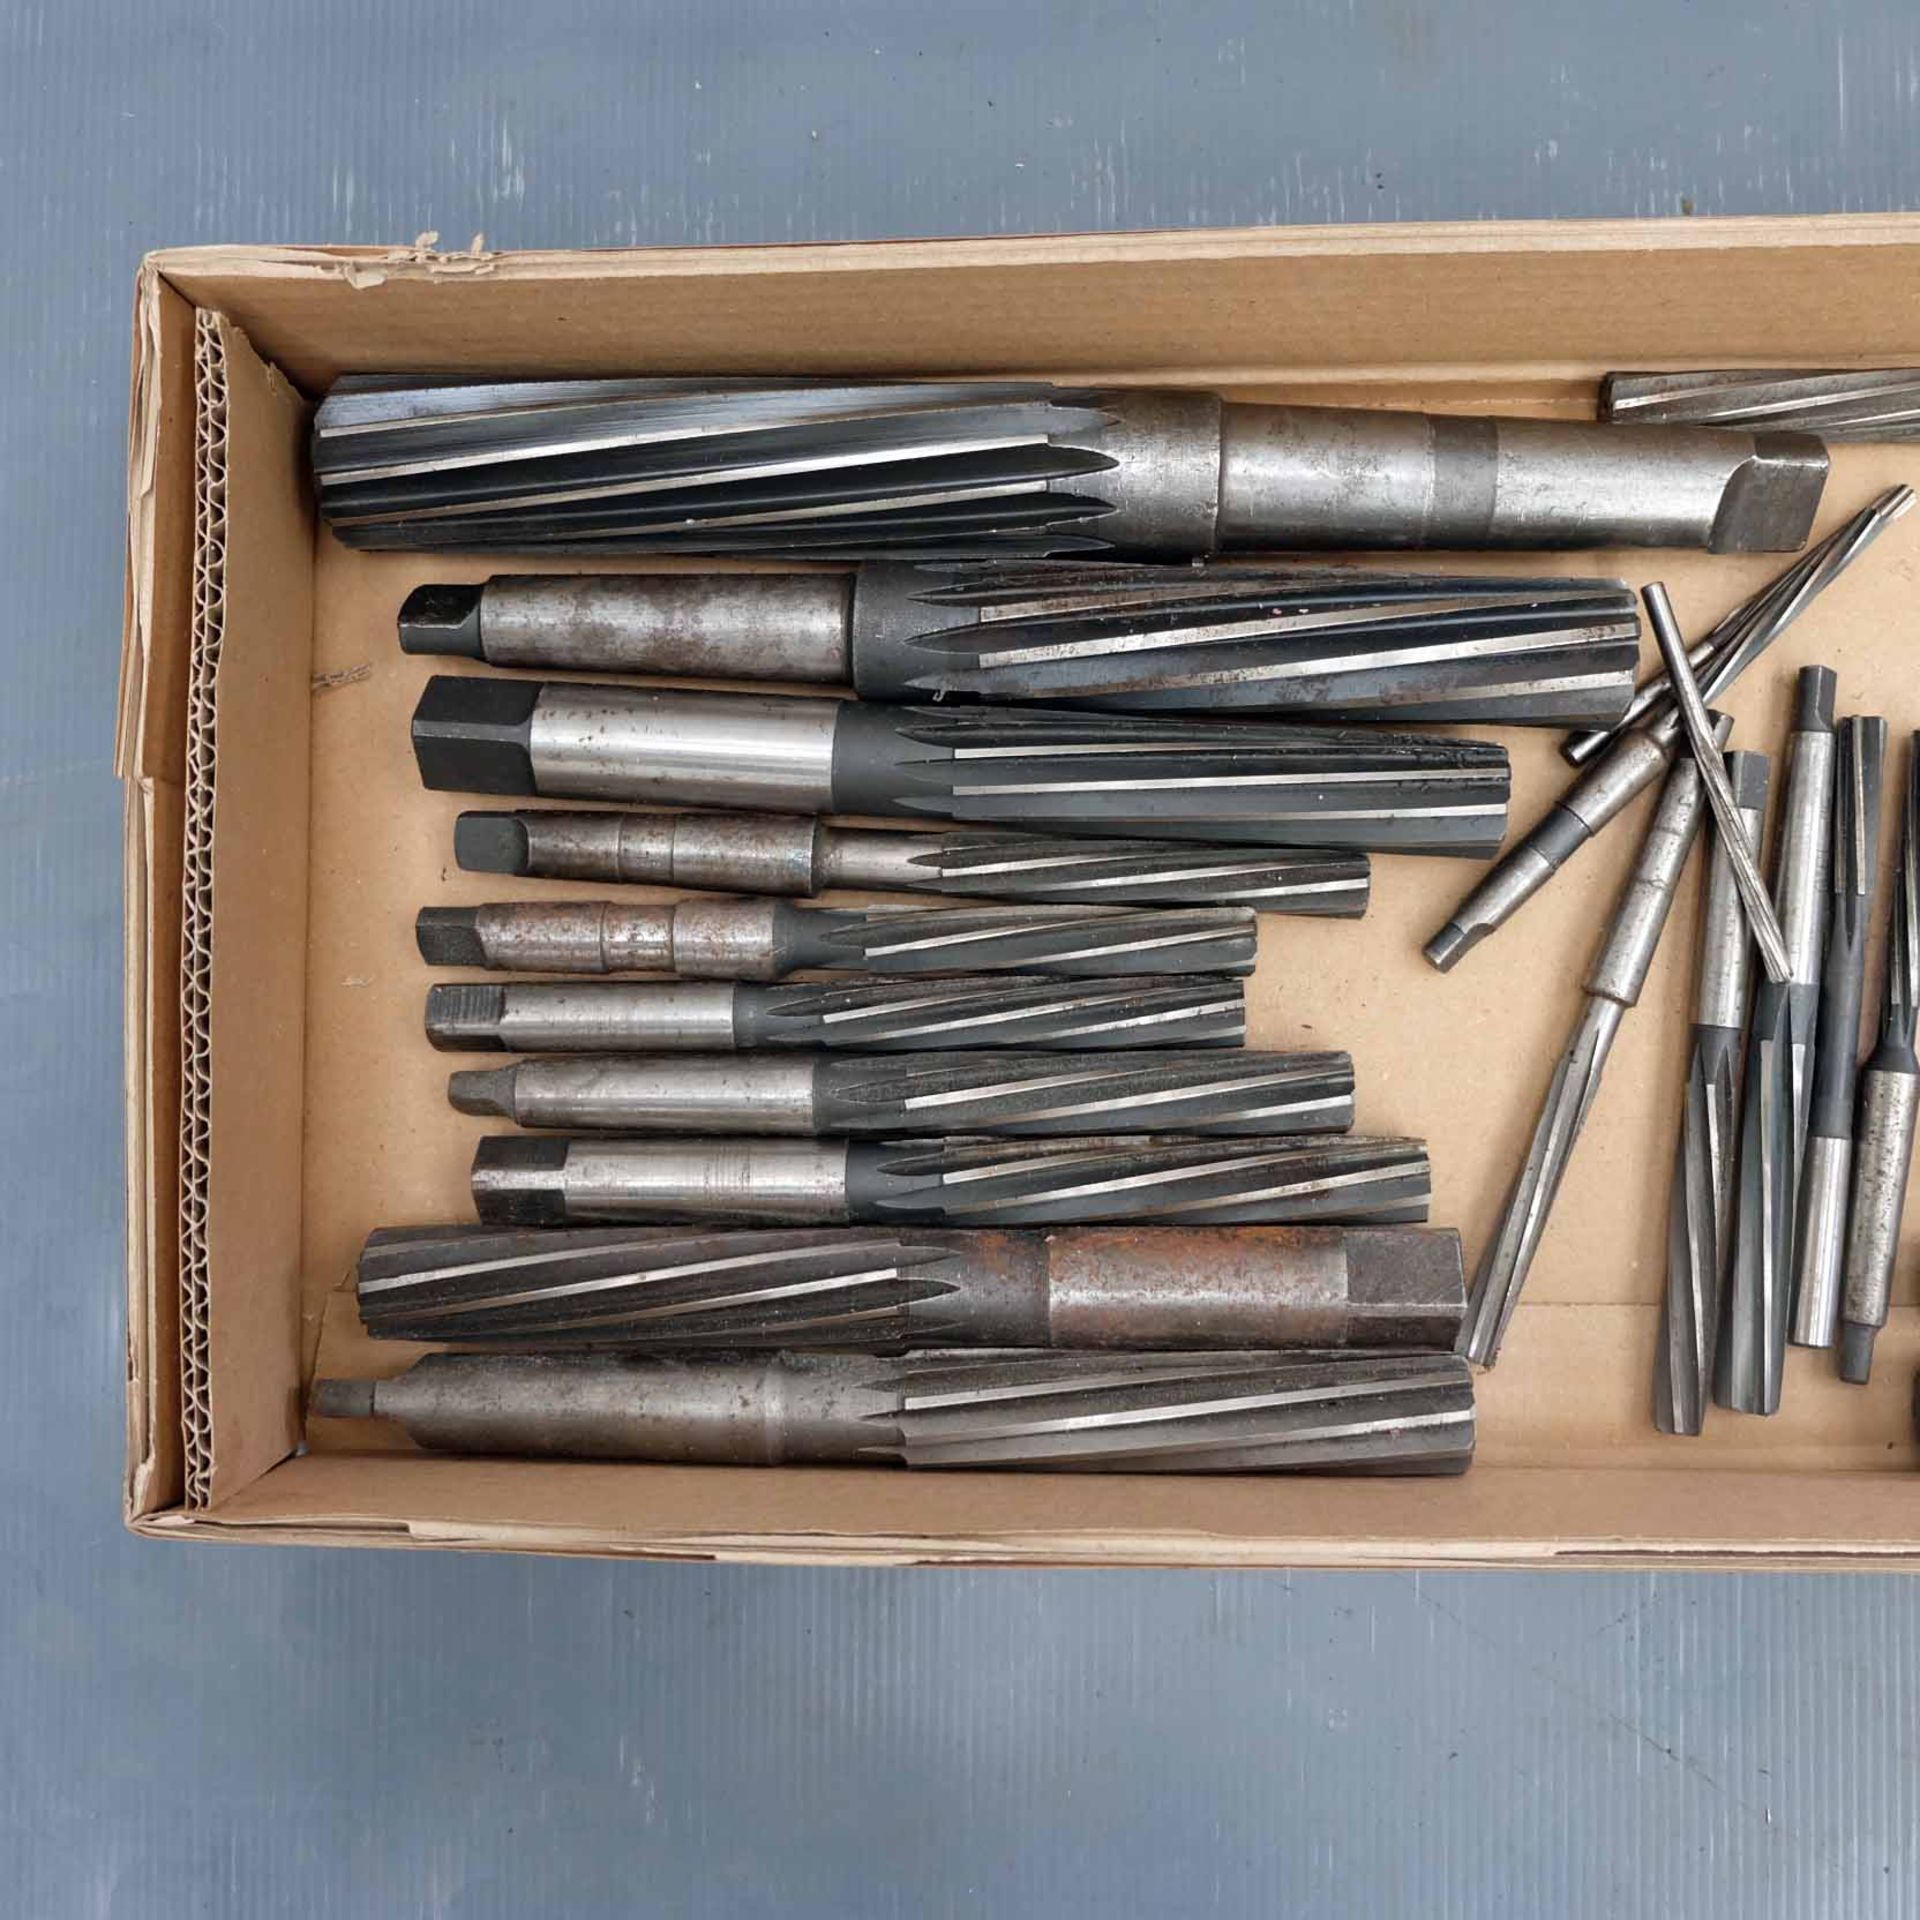 Quantity of Various Sized Reamers. 1 - 4 MT, Straight Shank & Hand. - Image 2 of 3